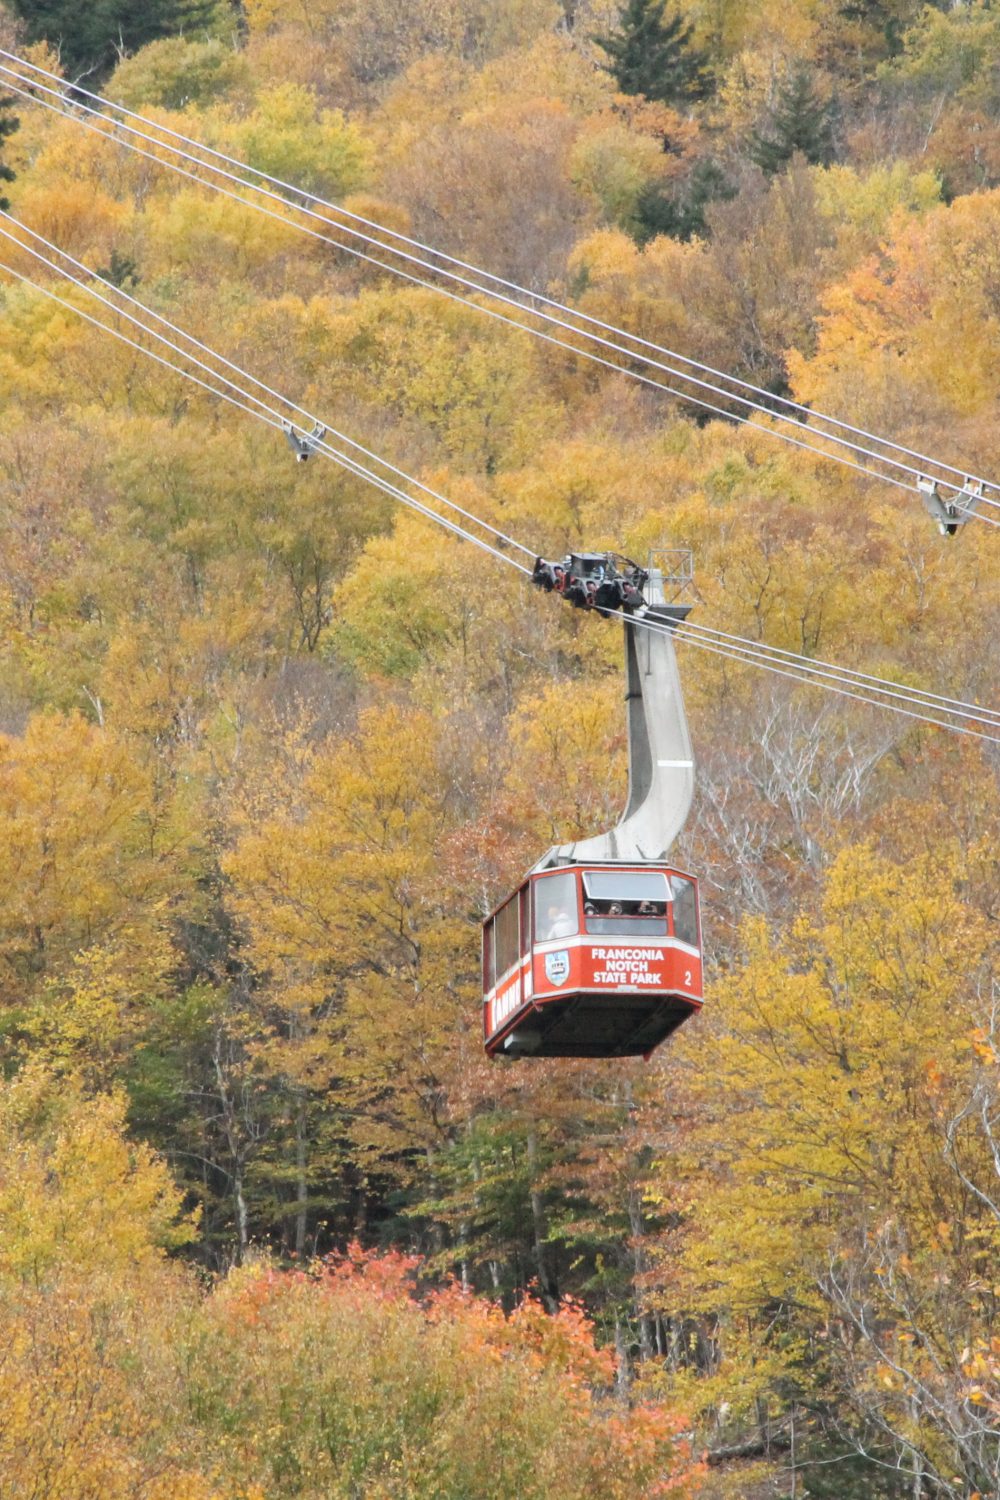 Tramway in Franconia Notch State Park in New Hampshire